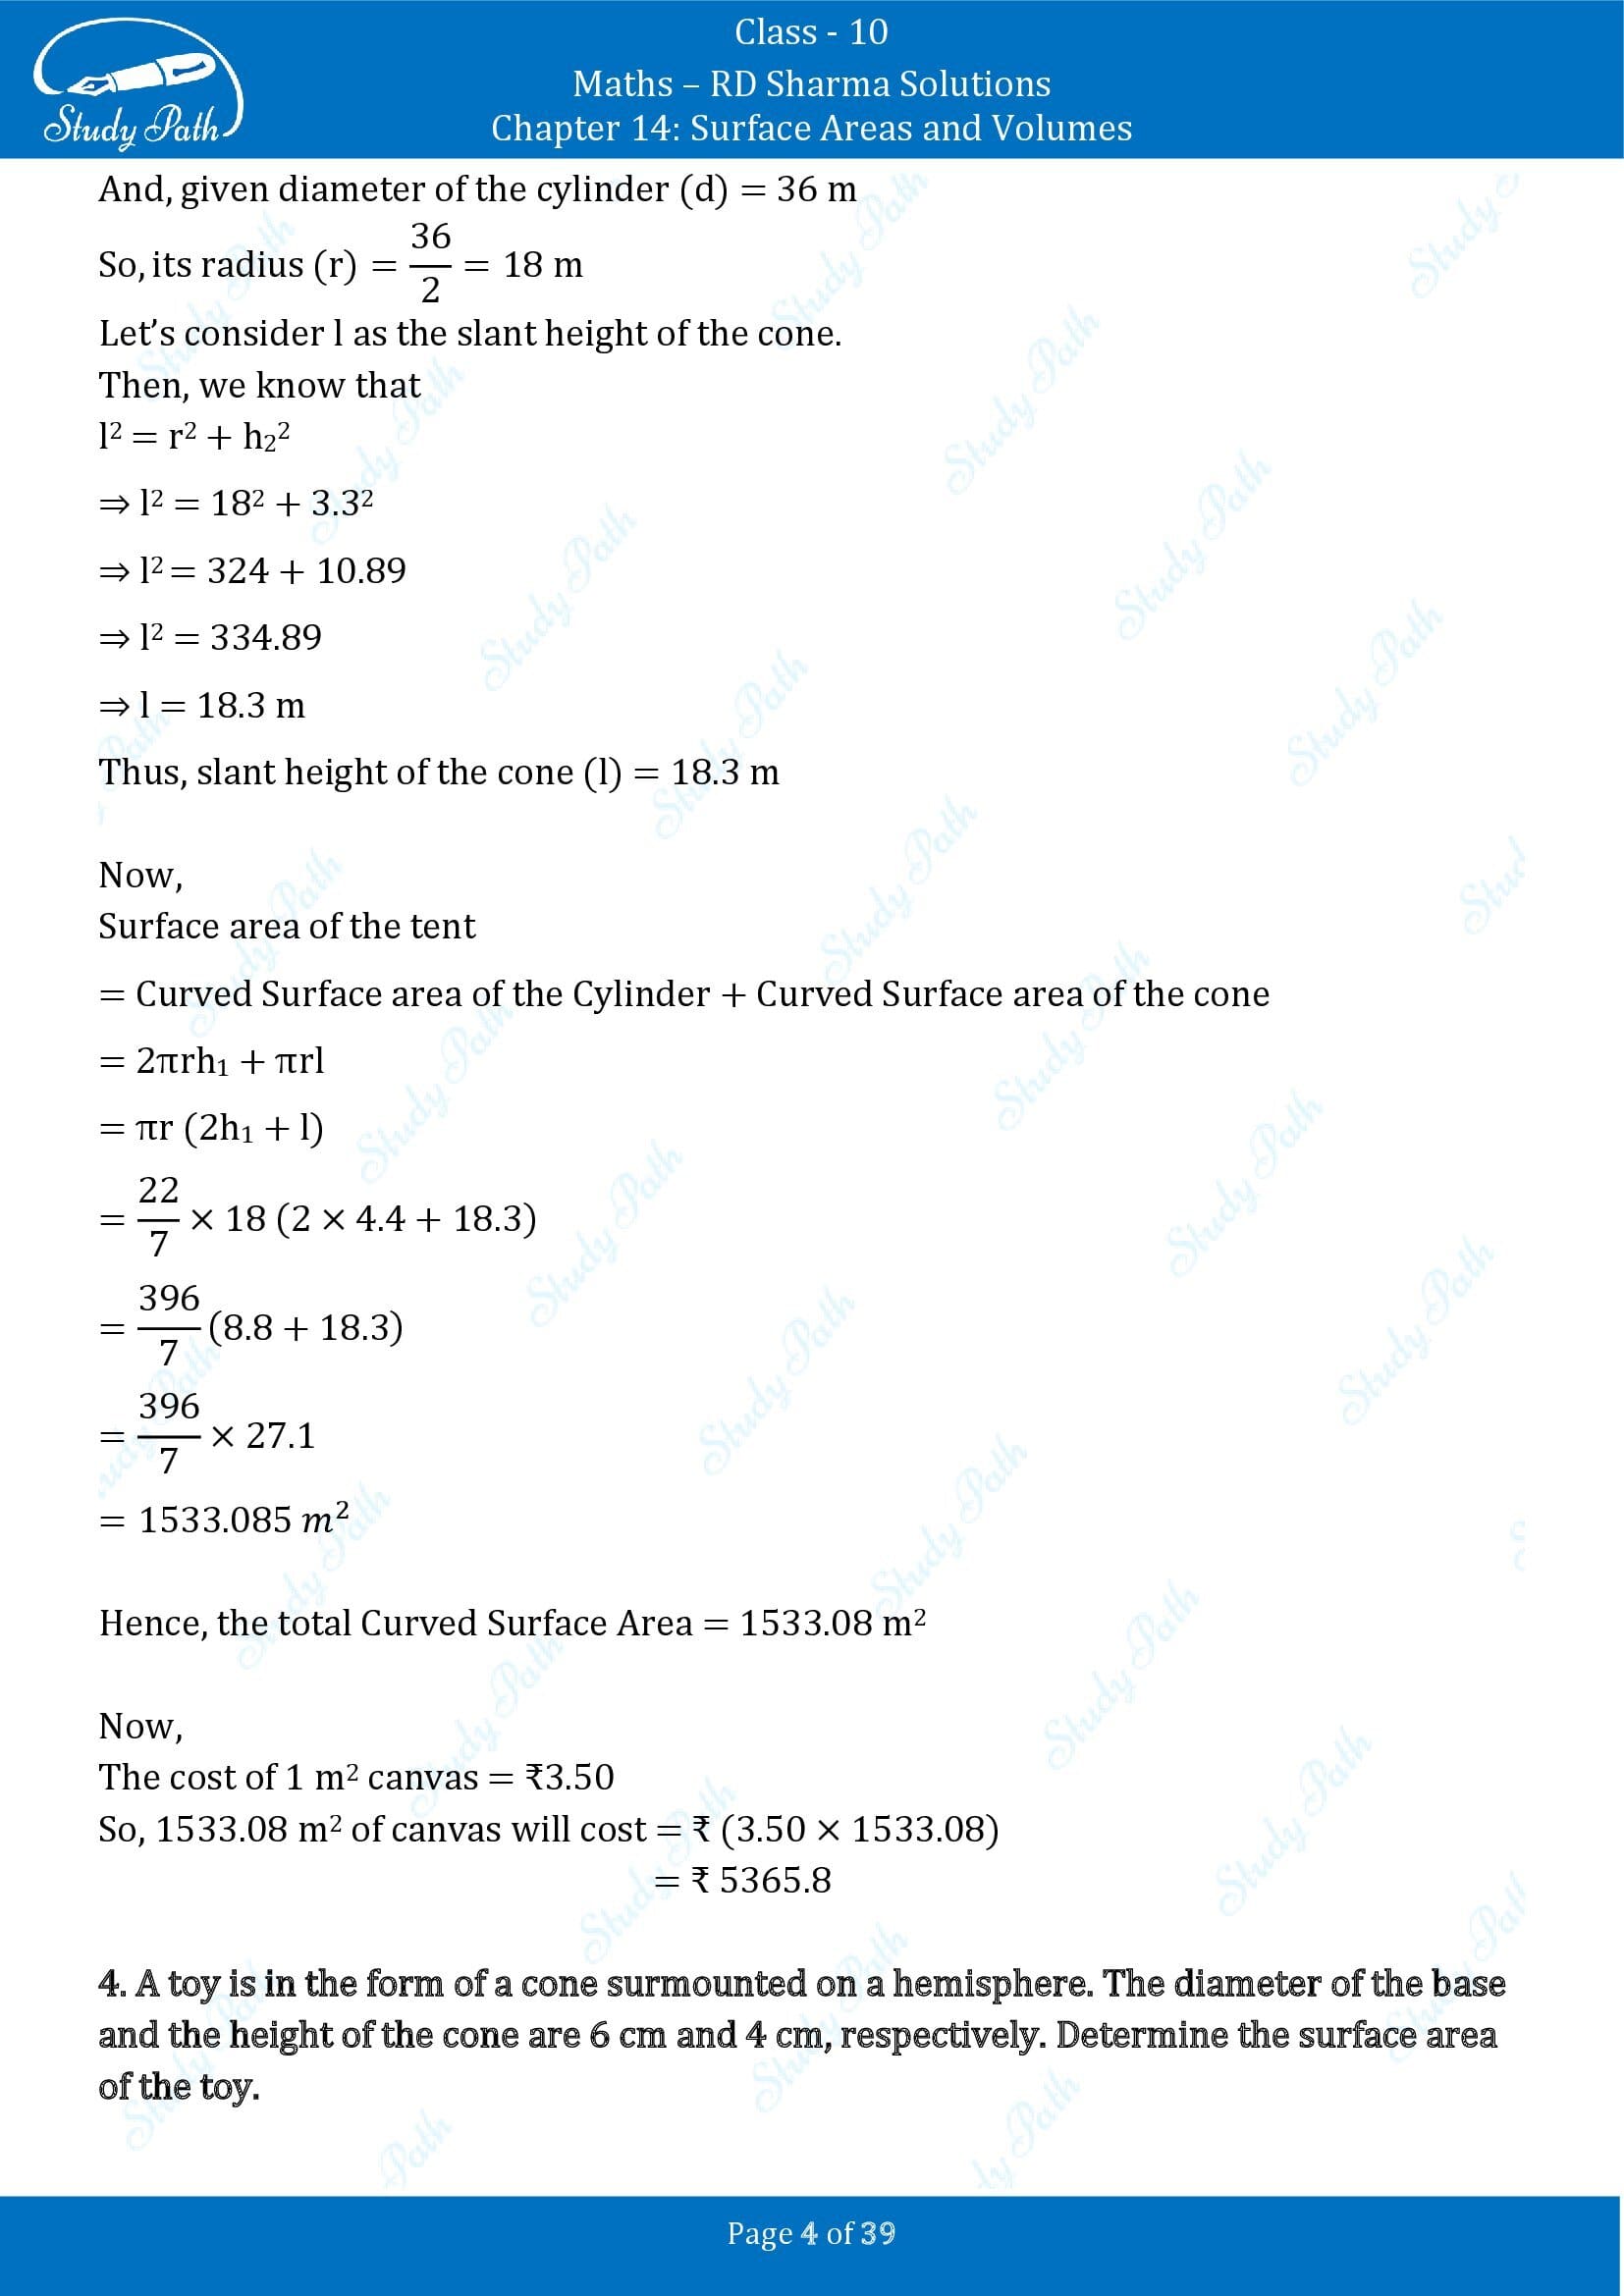 RD Sharma Solutions Class 10 Chapter 14 Surface Areas and Volumes Exercise 14.2 00004